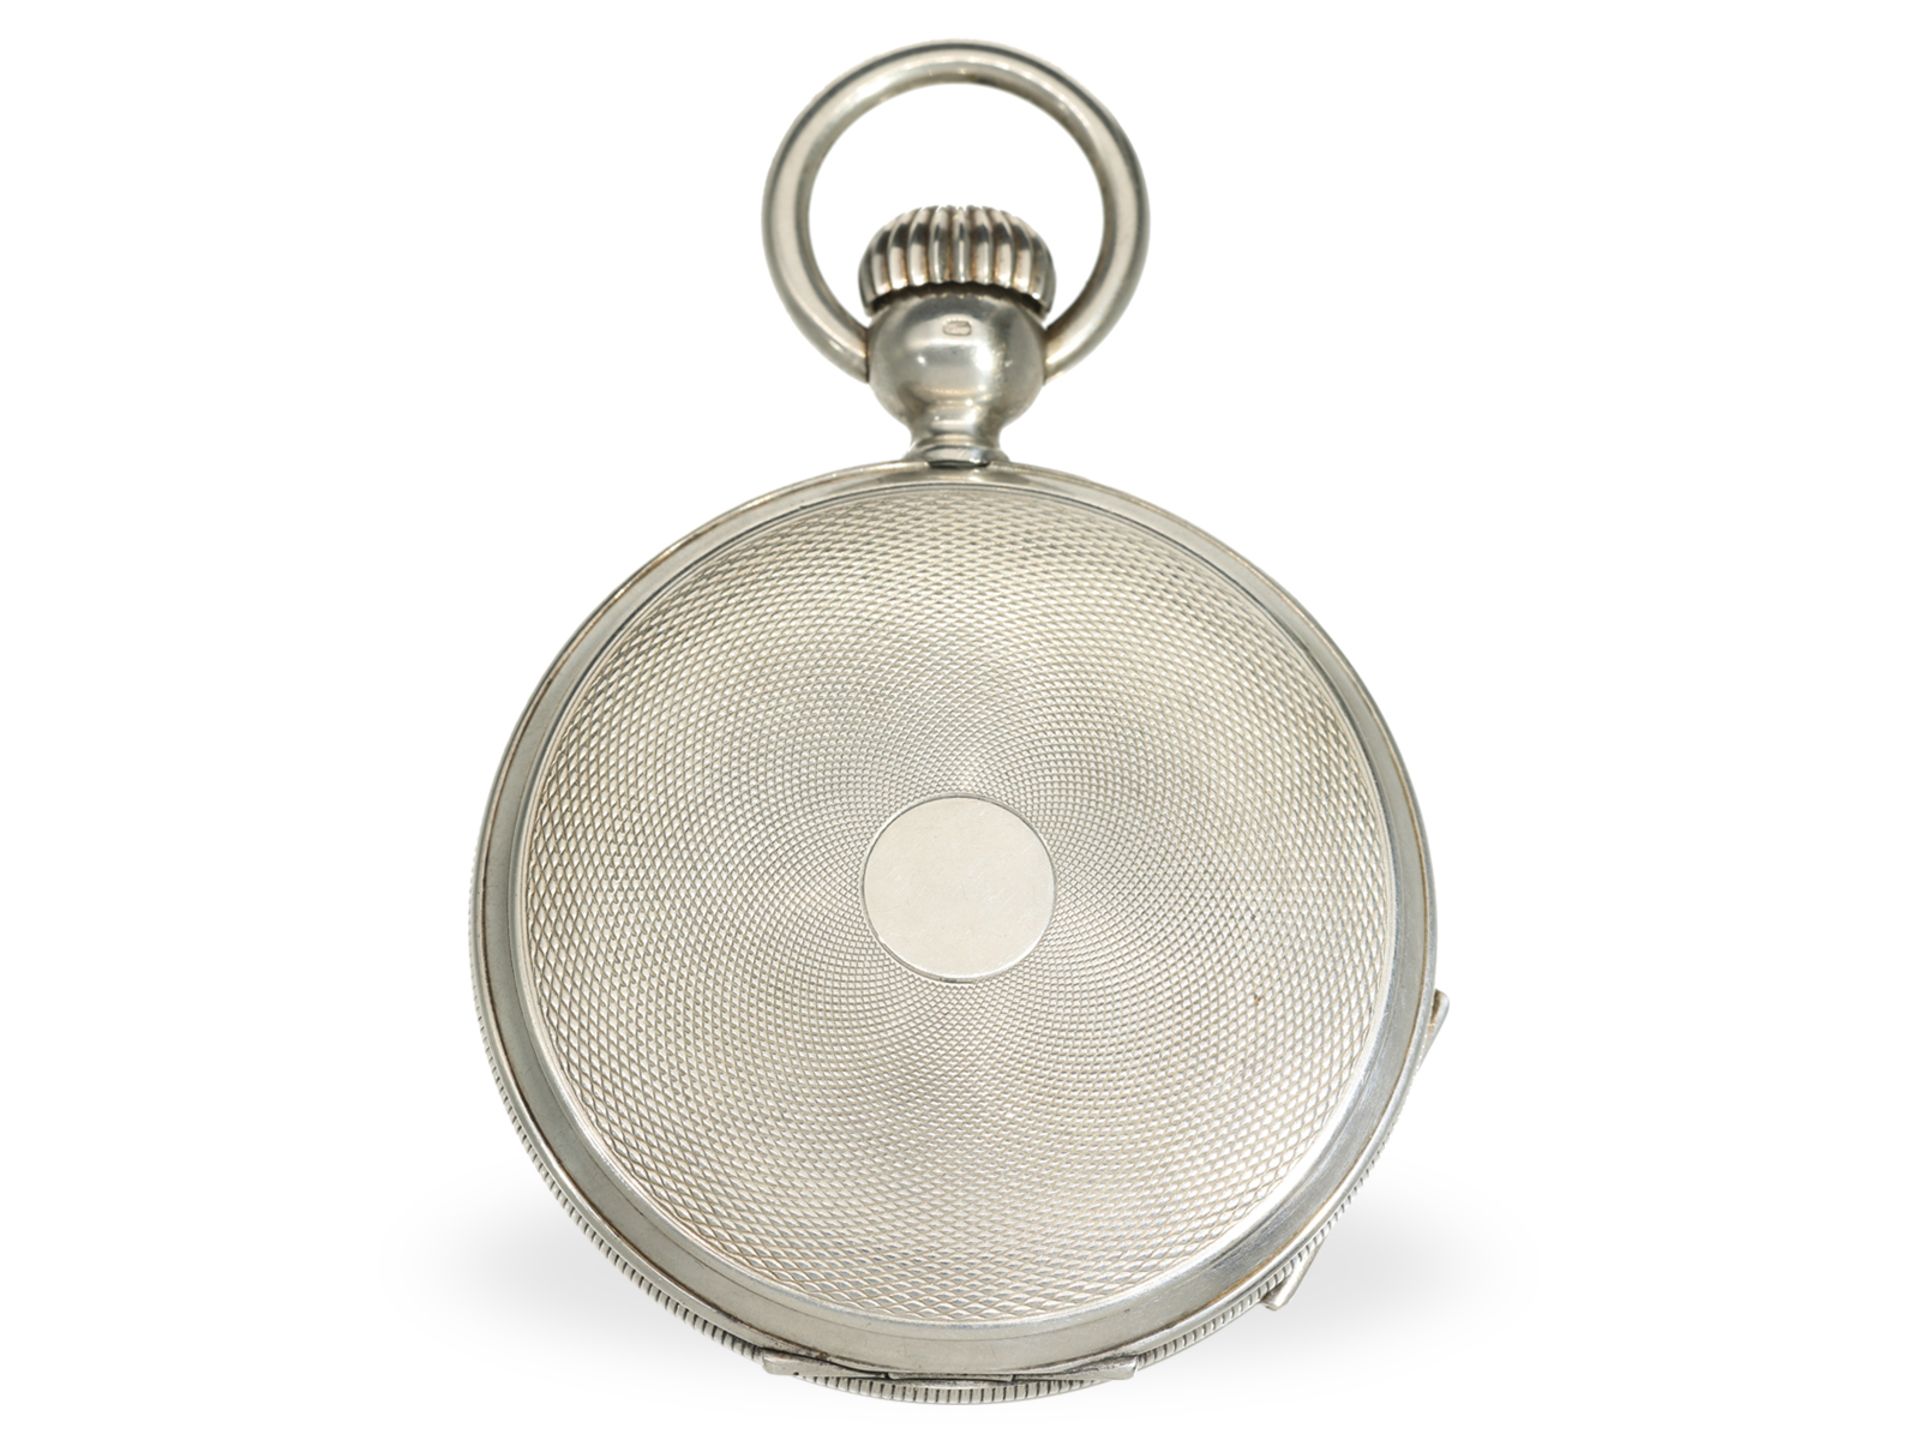 Pocket watch: rare, limited Longines Ernest Francillon 125th "1867" Ref. 840.8022, 399/1000 - Image 3 of 7